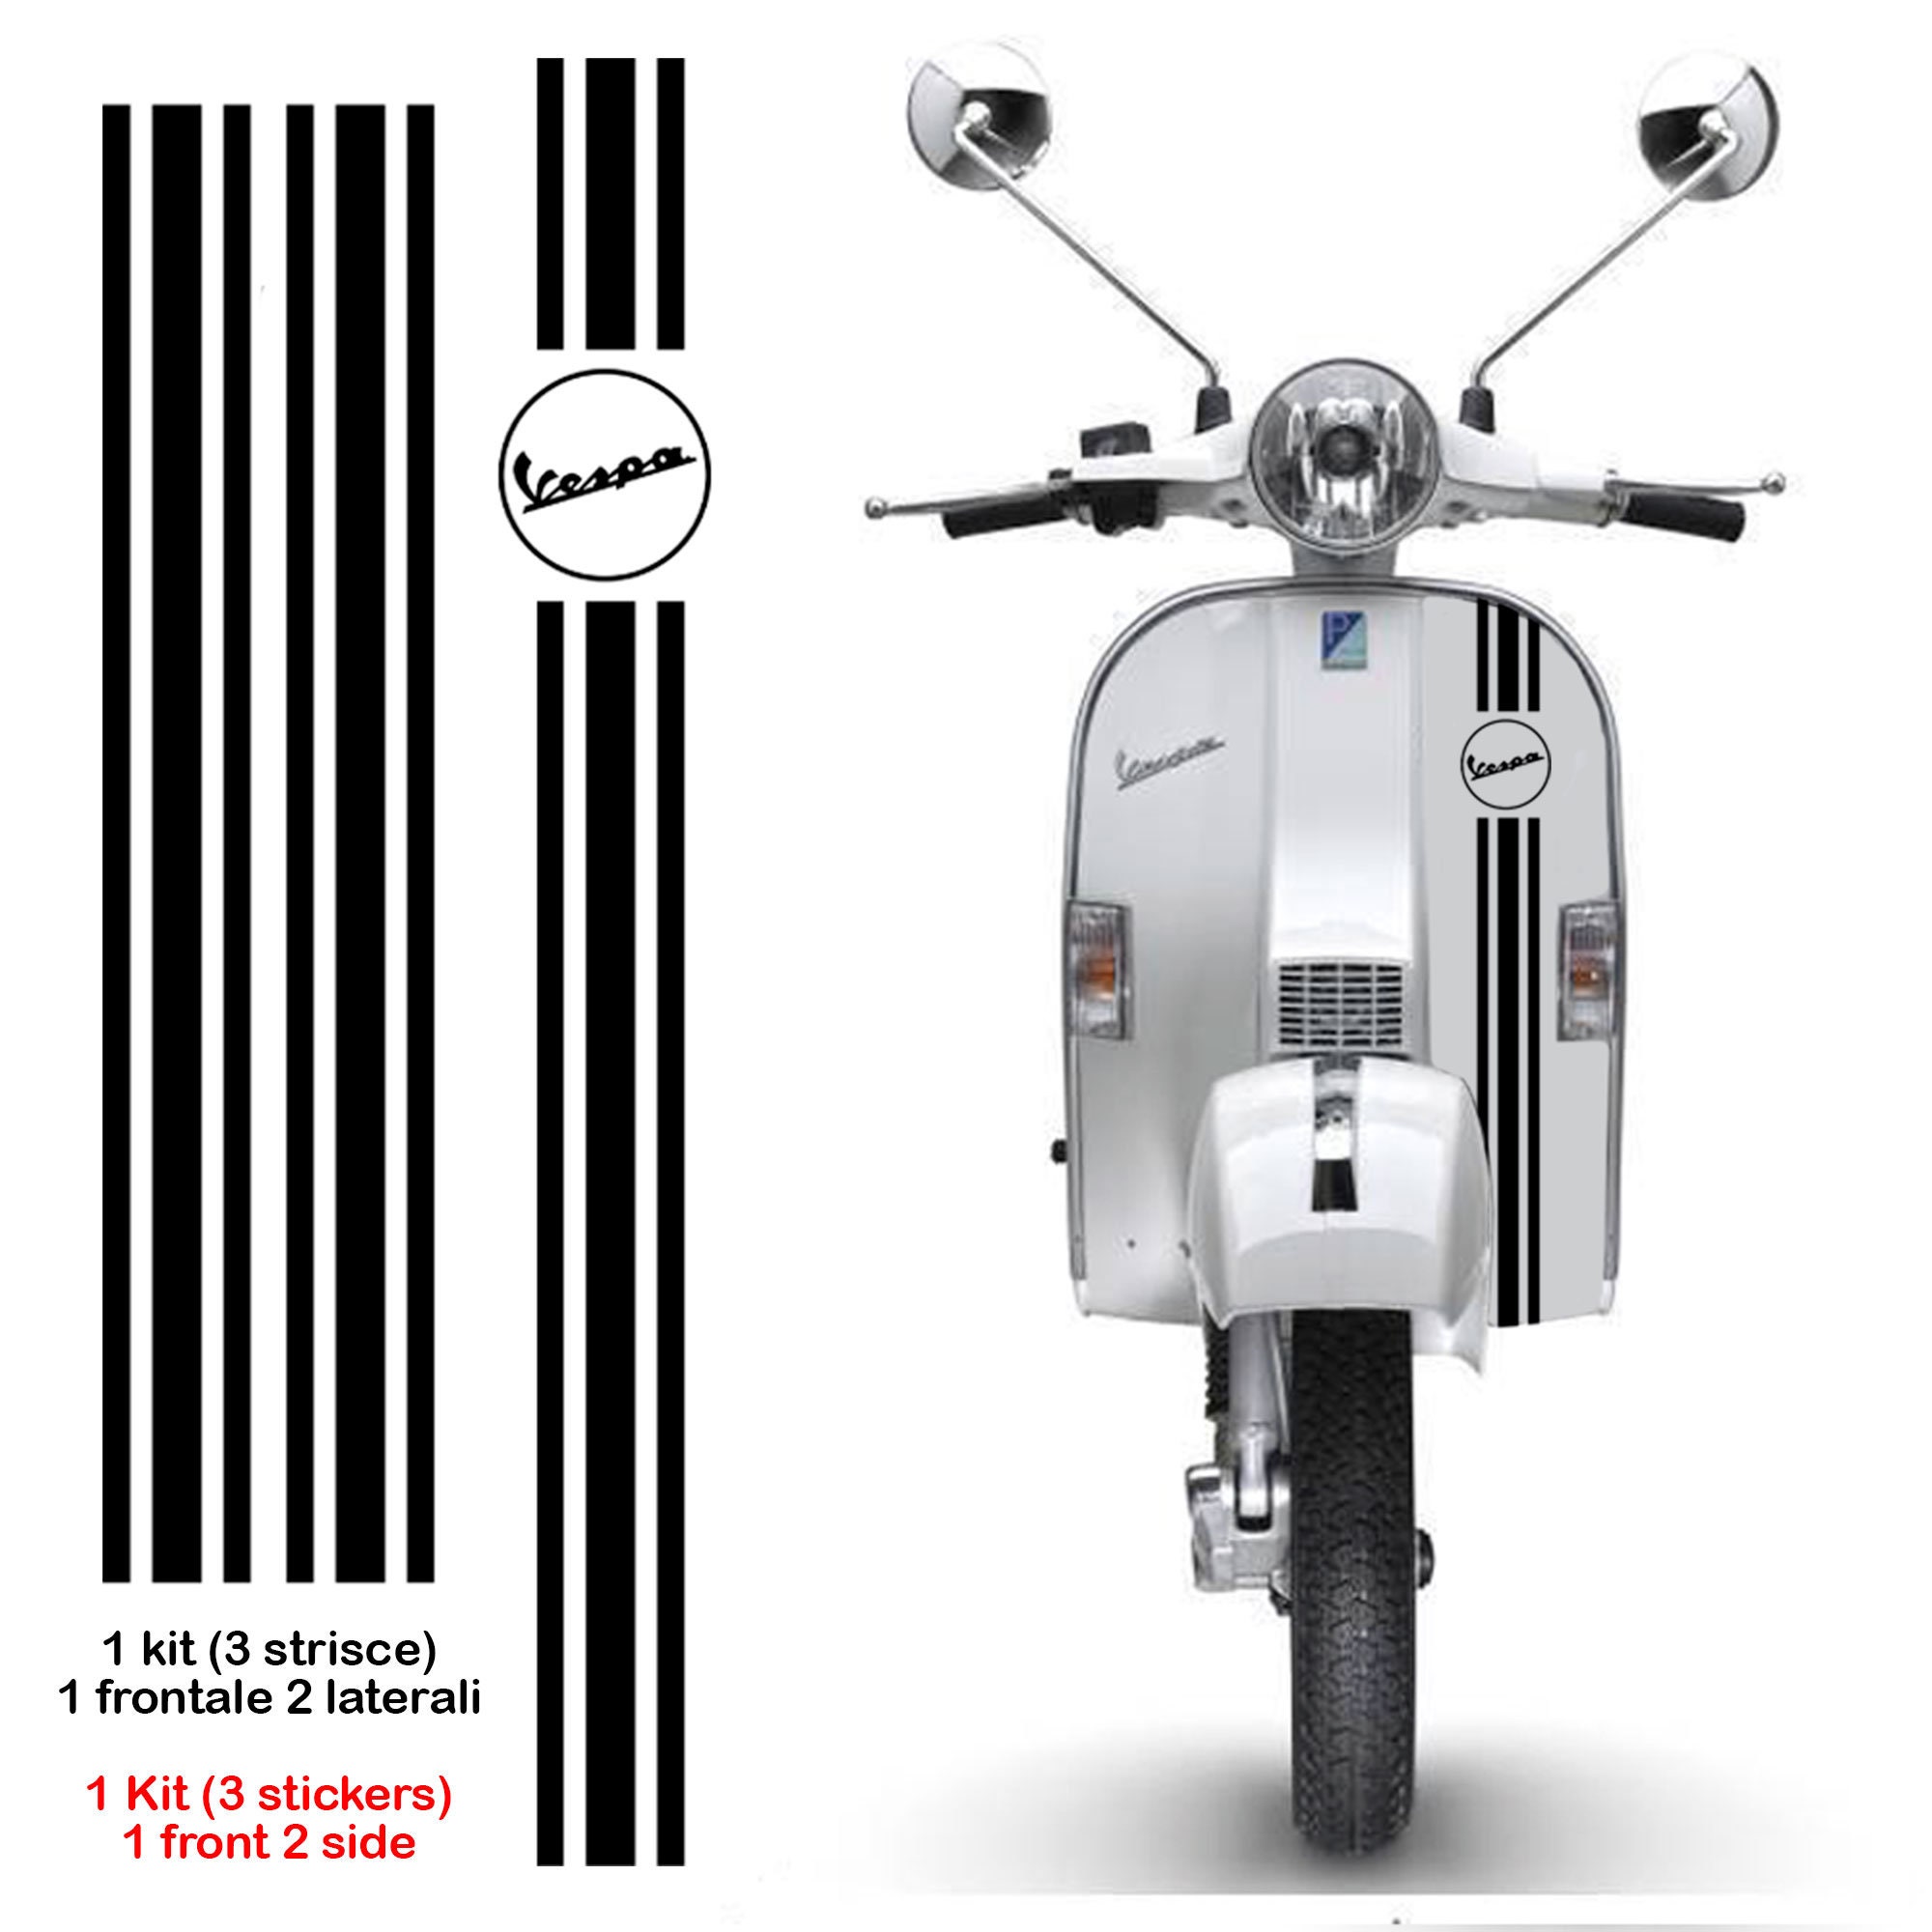 Vespa Sticker - For Riders Who Like to Feel The Wind On Their Vagina -  Motorbike